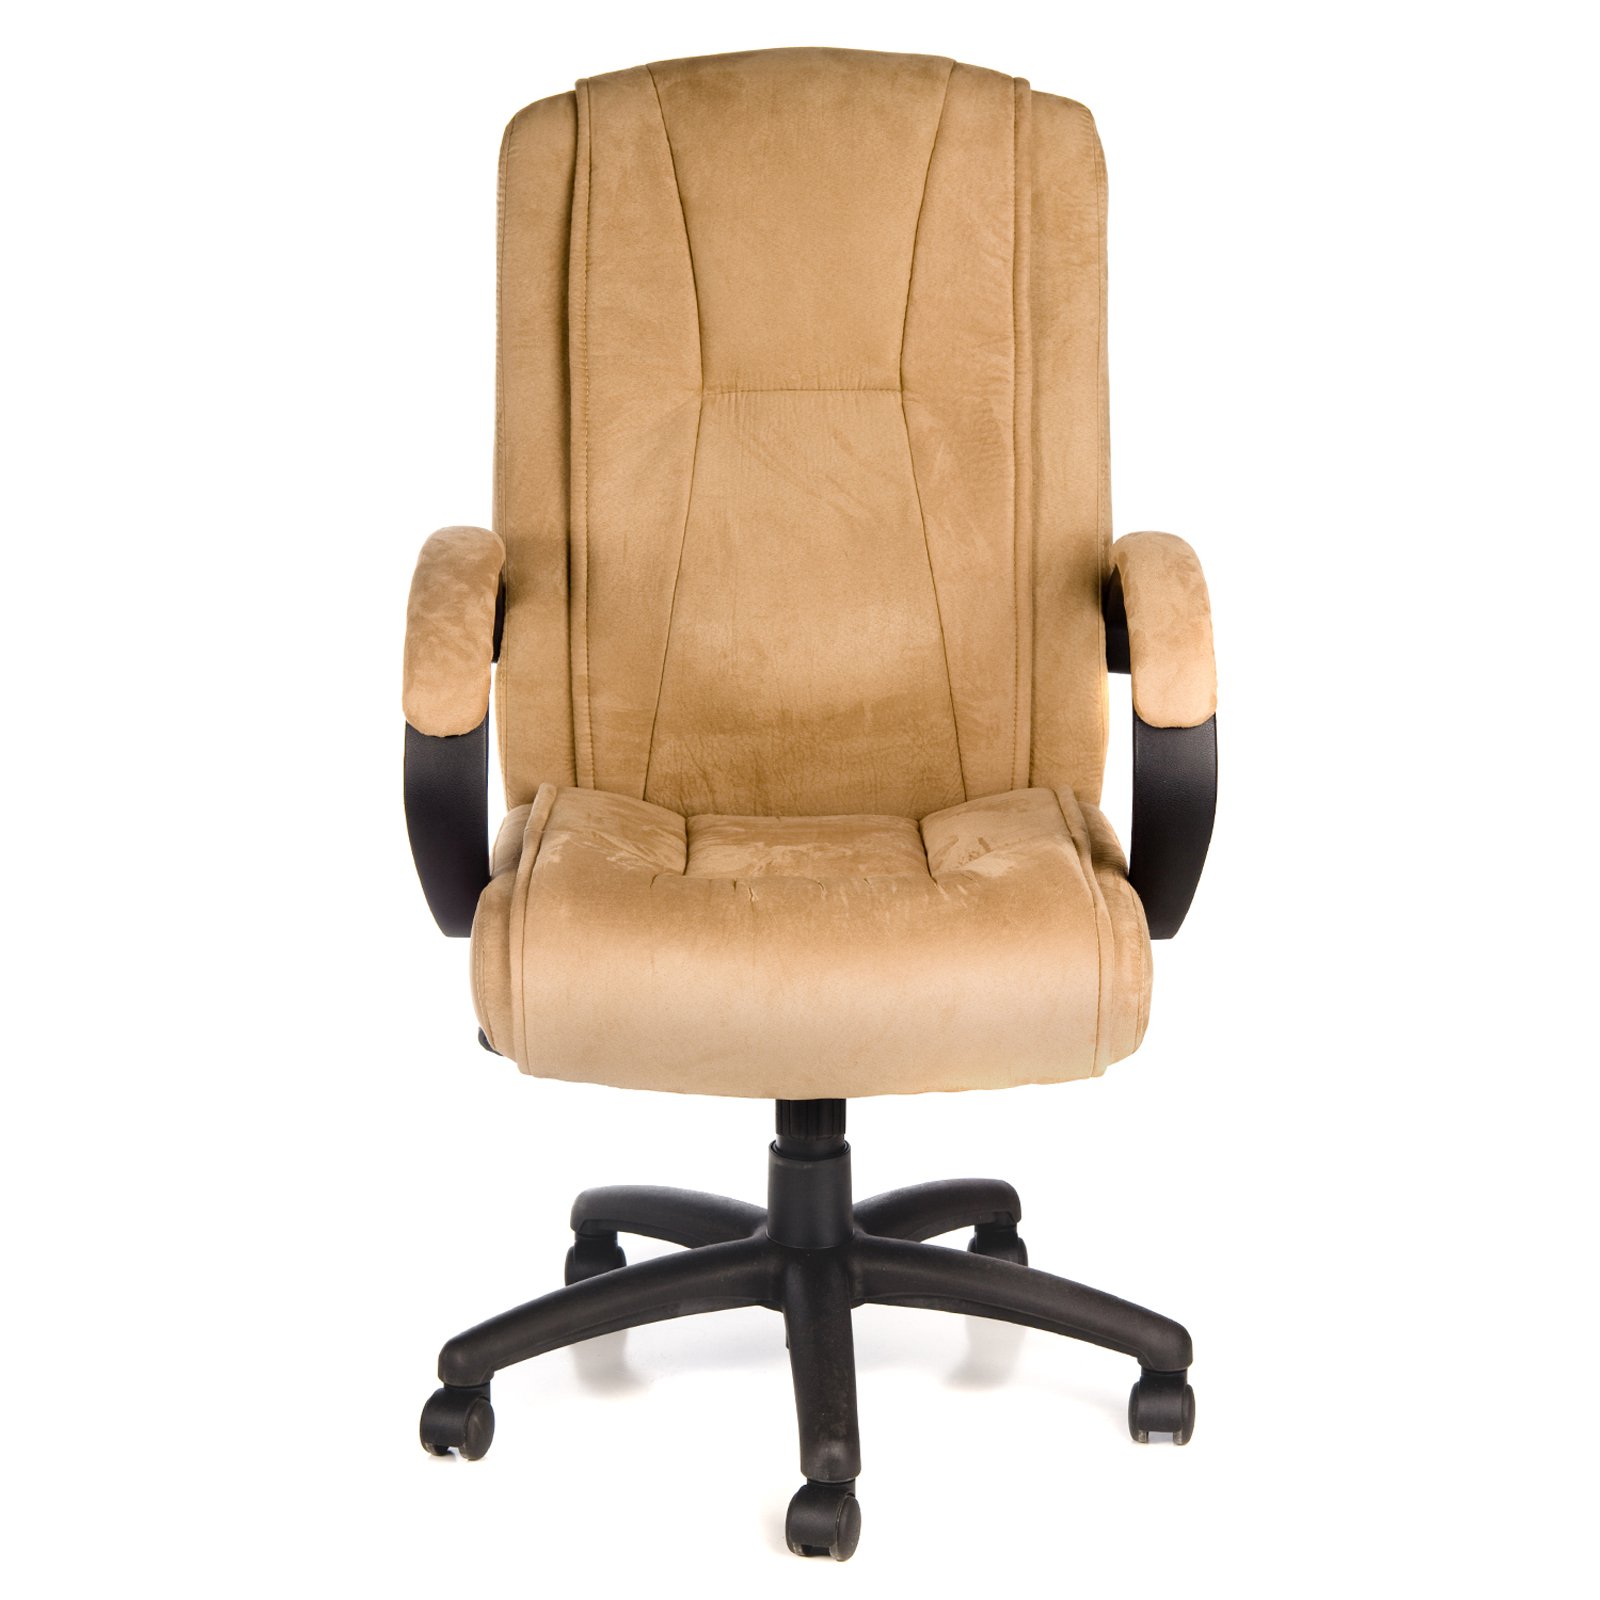 Comfort Products 60-0971 Padded Microfiber Fabric Executive Chair, Beige - image 2 of 3